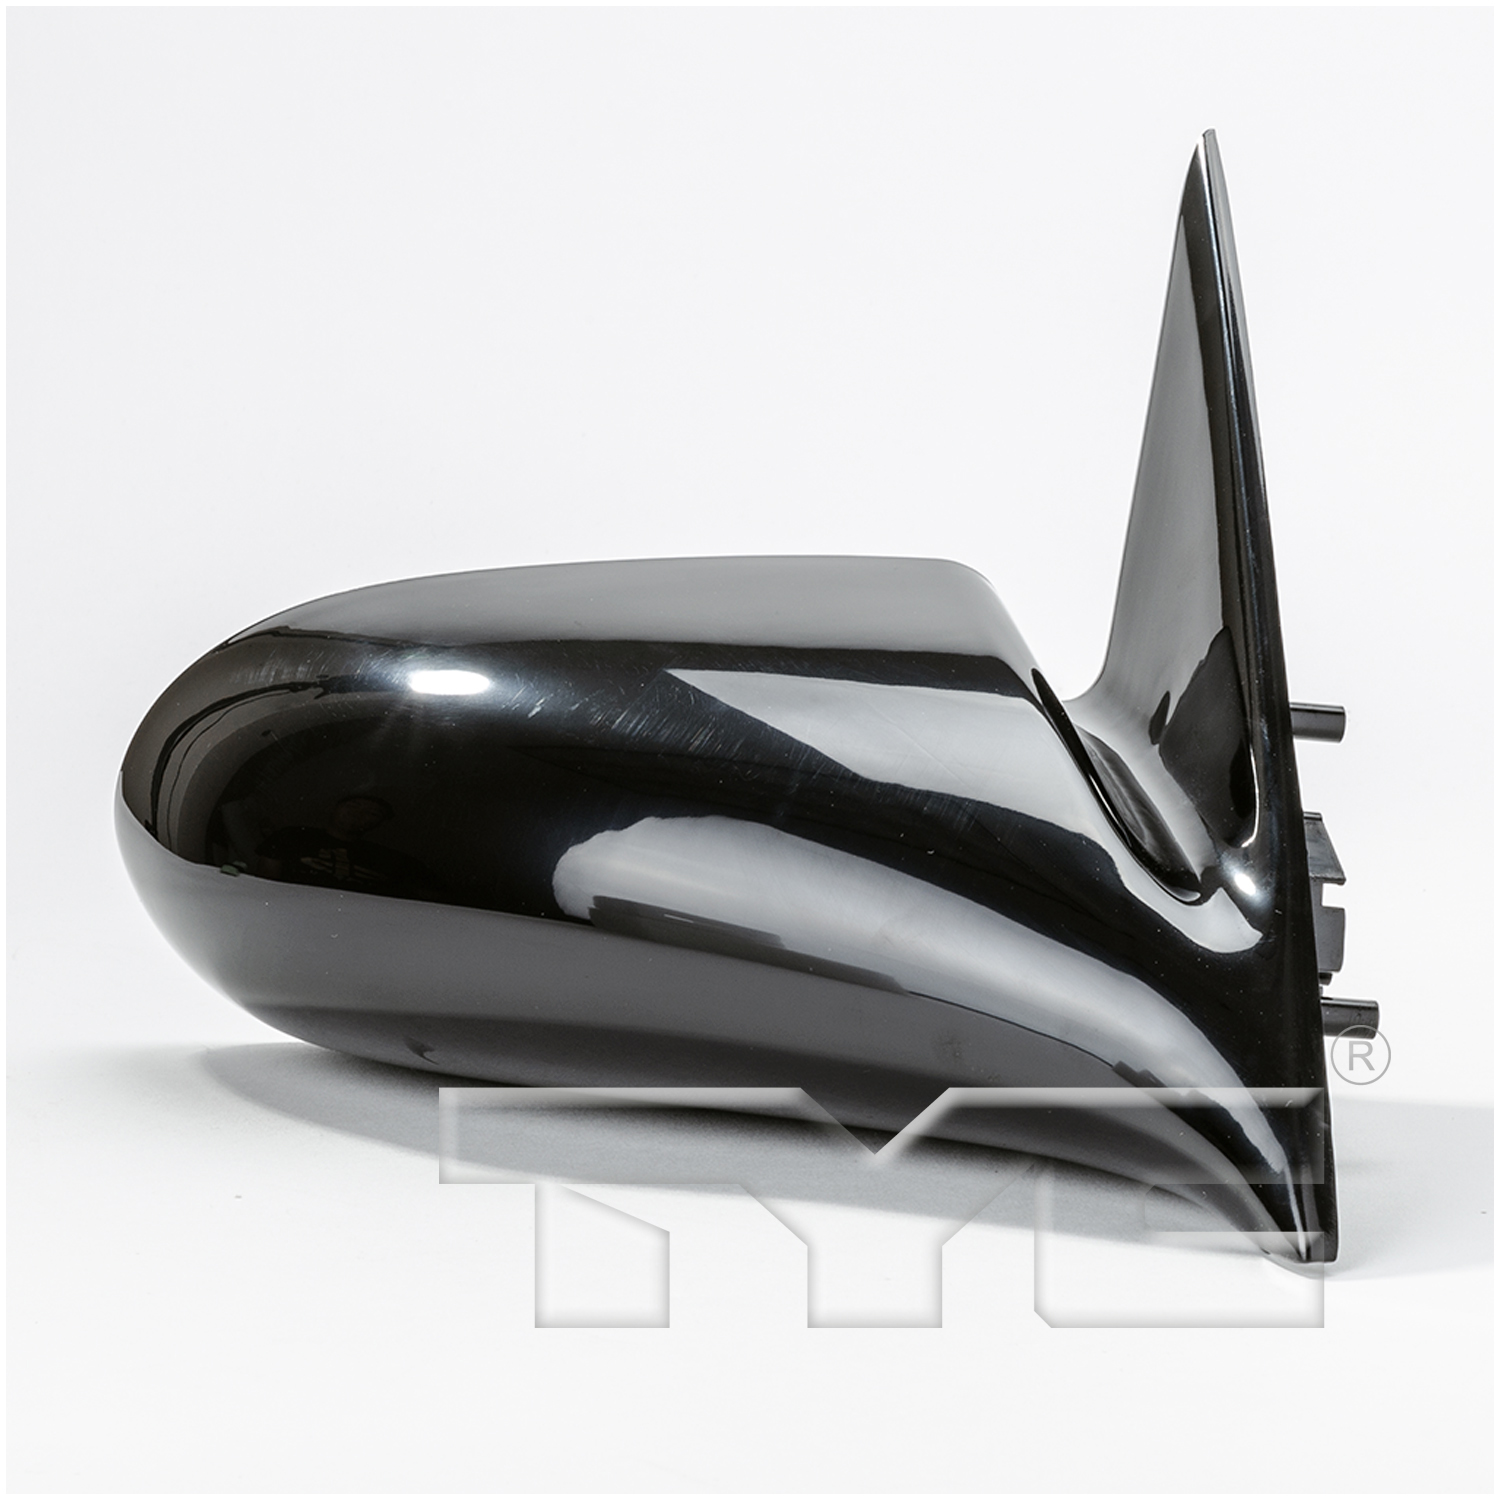 Aftermarket MIRRORS for CHEVROLET - METRO, METRO,98-01,RT Mirror outside rear view